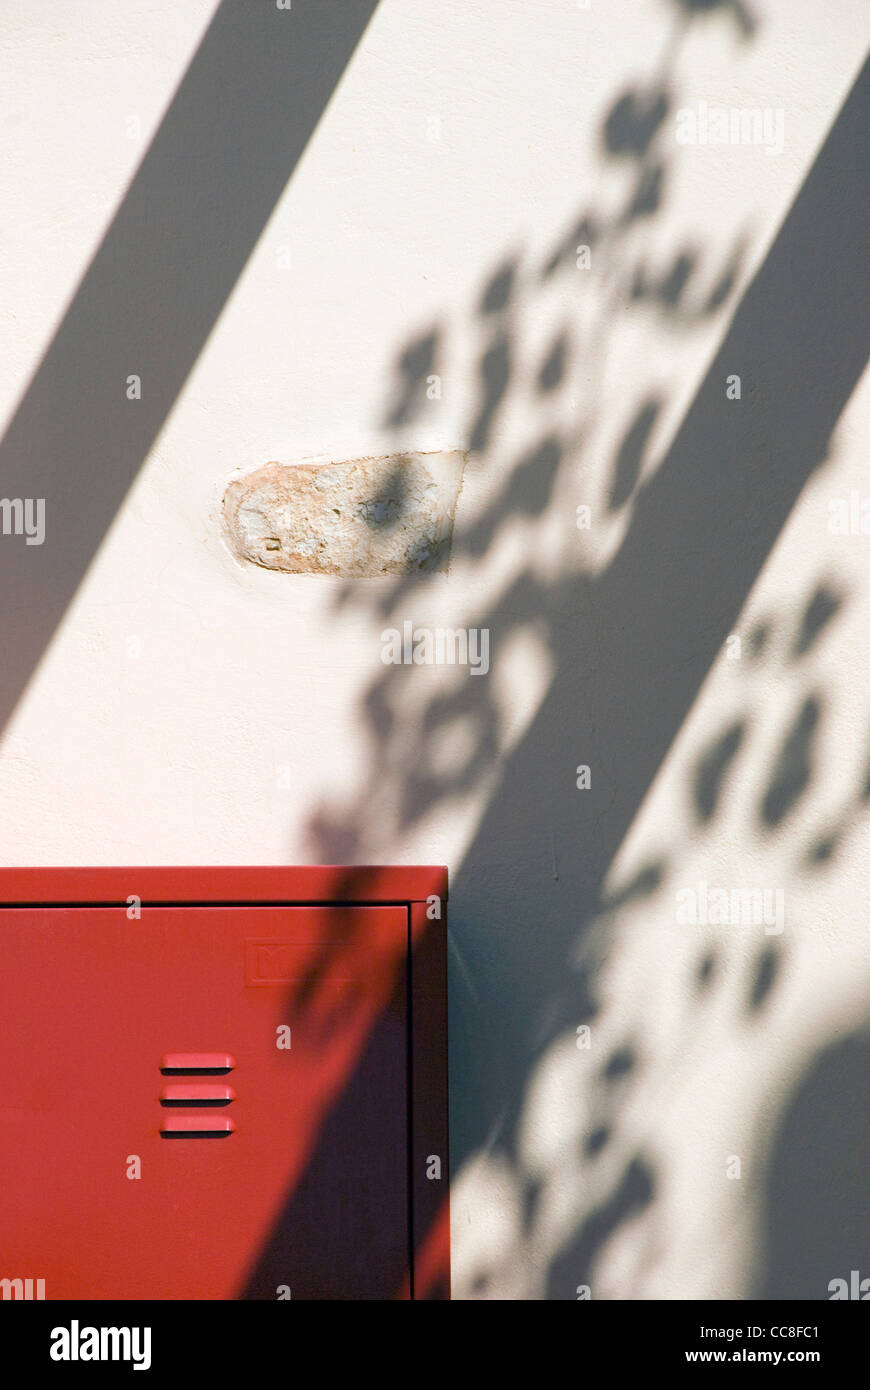 Abstract image. Red container and shadows Stock Photo